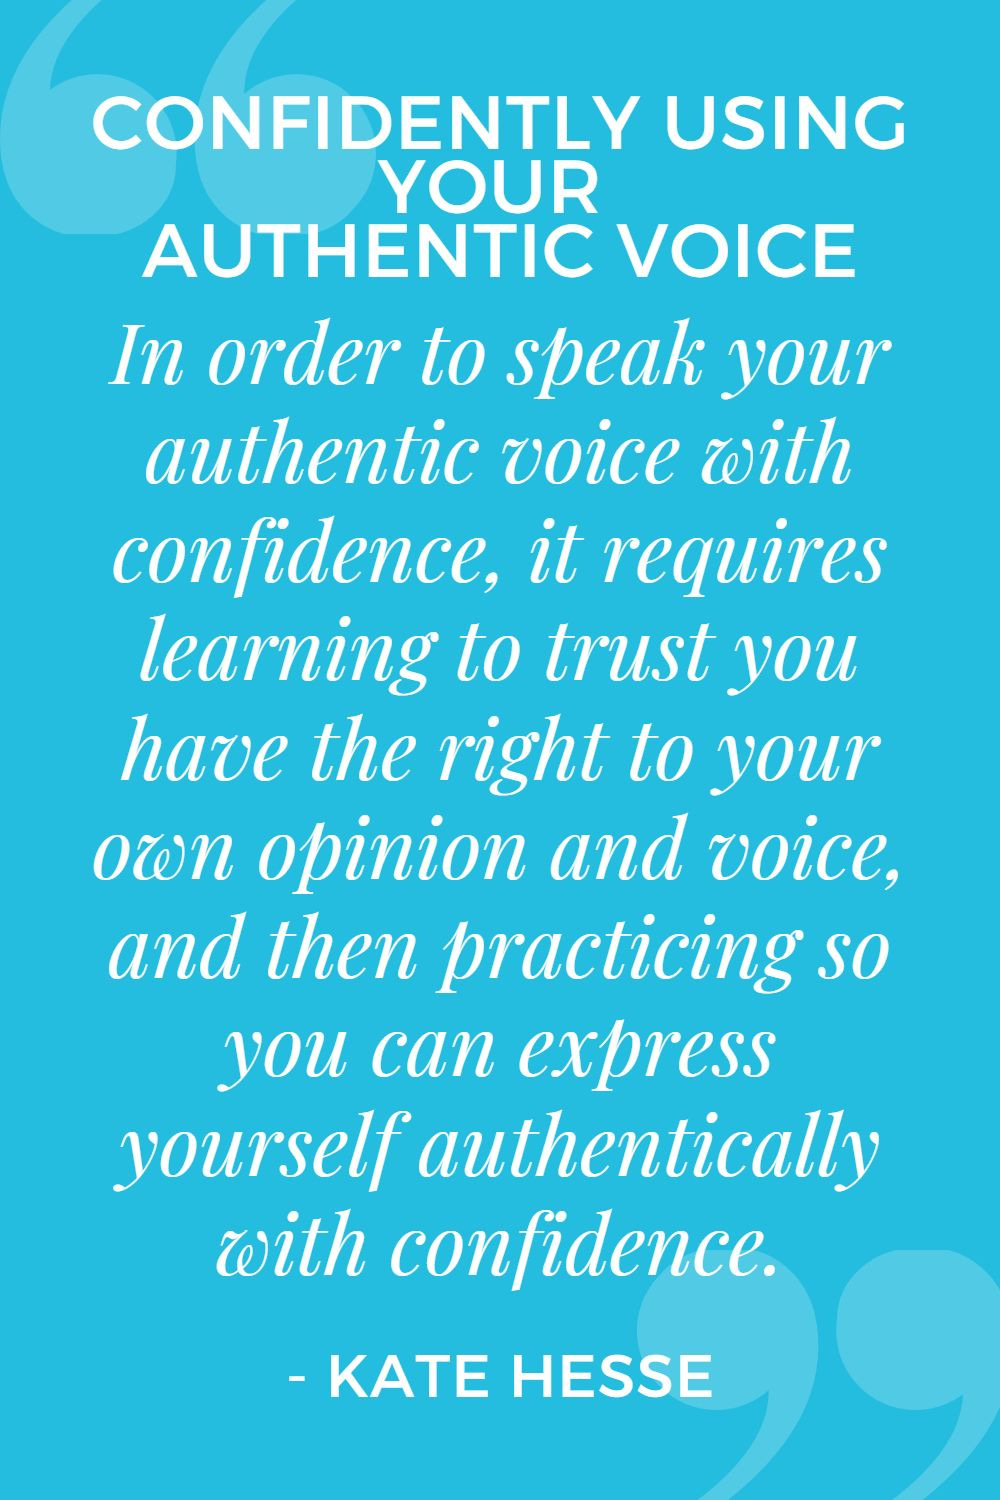 In order to speak your authentic voice with confidence, it requires learning to trust you have the right to your own opinion and voice, and then practicing so you can express yourself authentically with confidence.